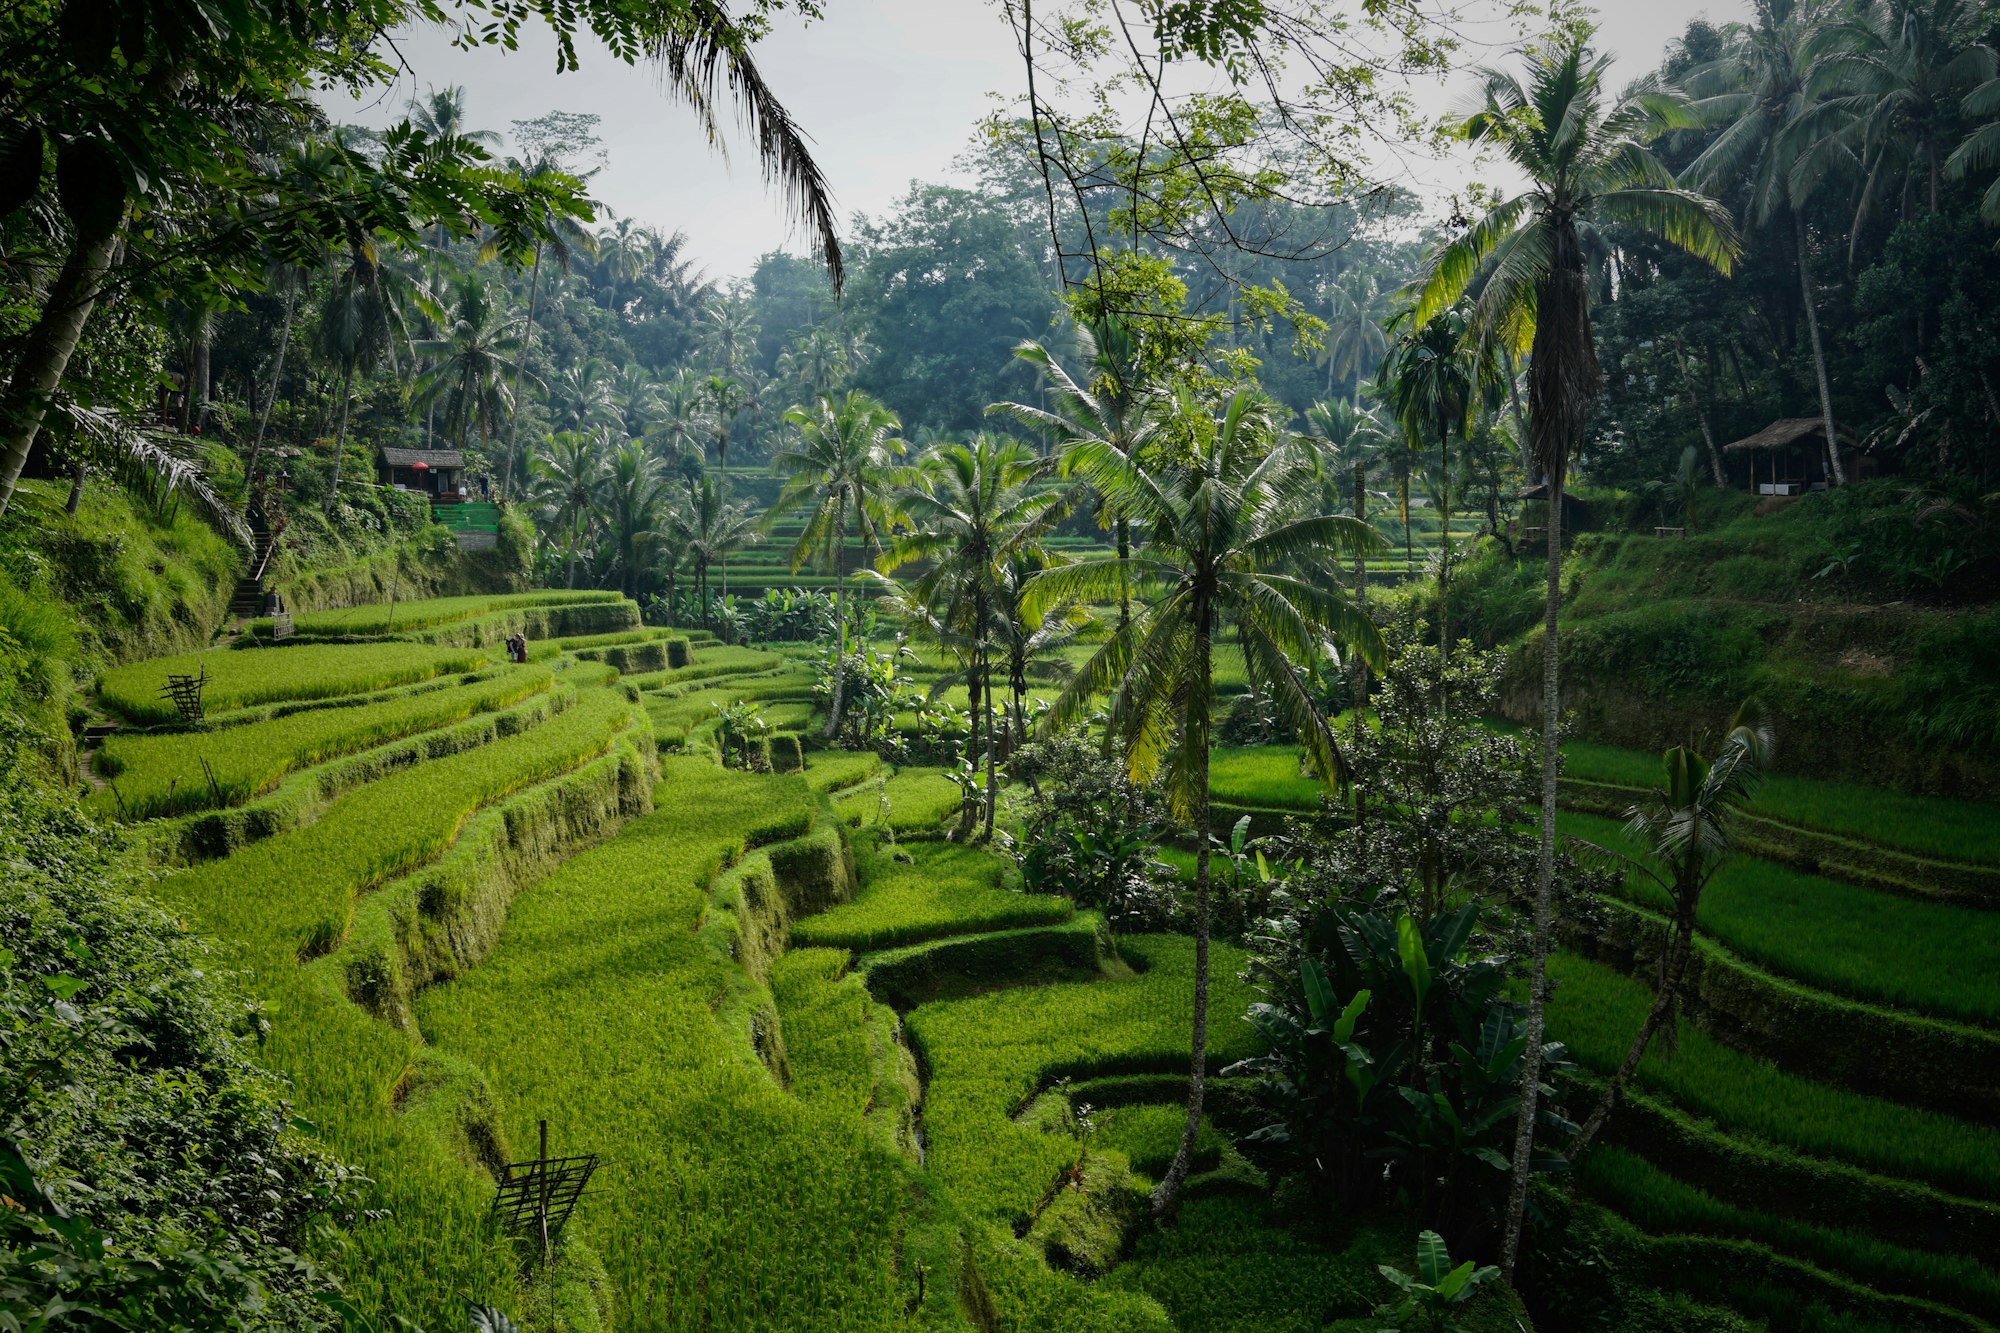 For a tourist visiting Indonesia, would it be better to try Java or Bali first?